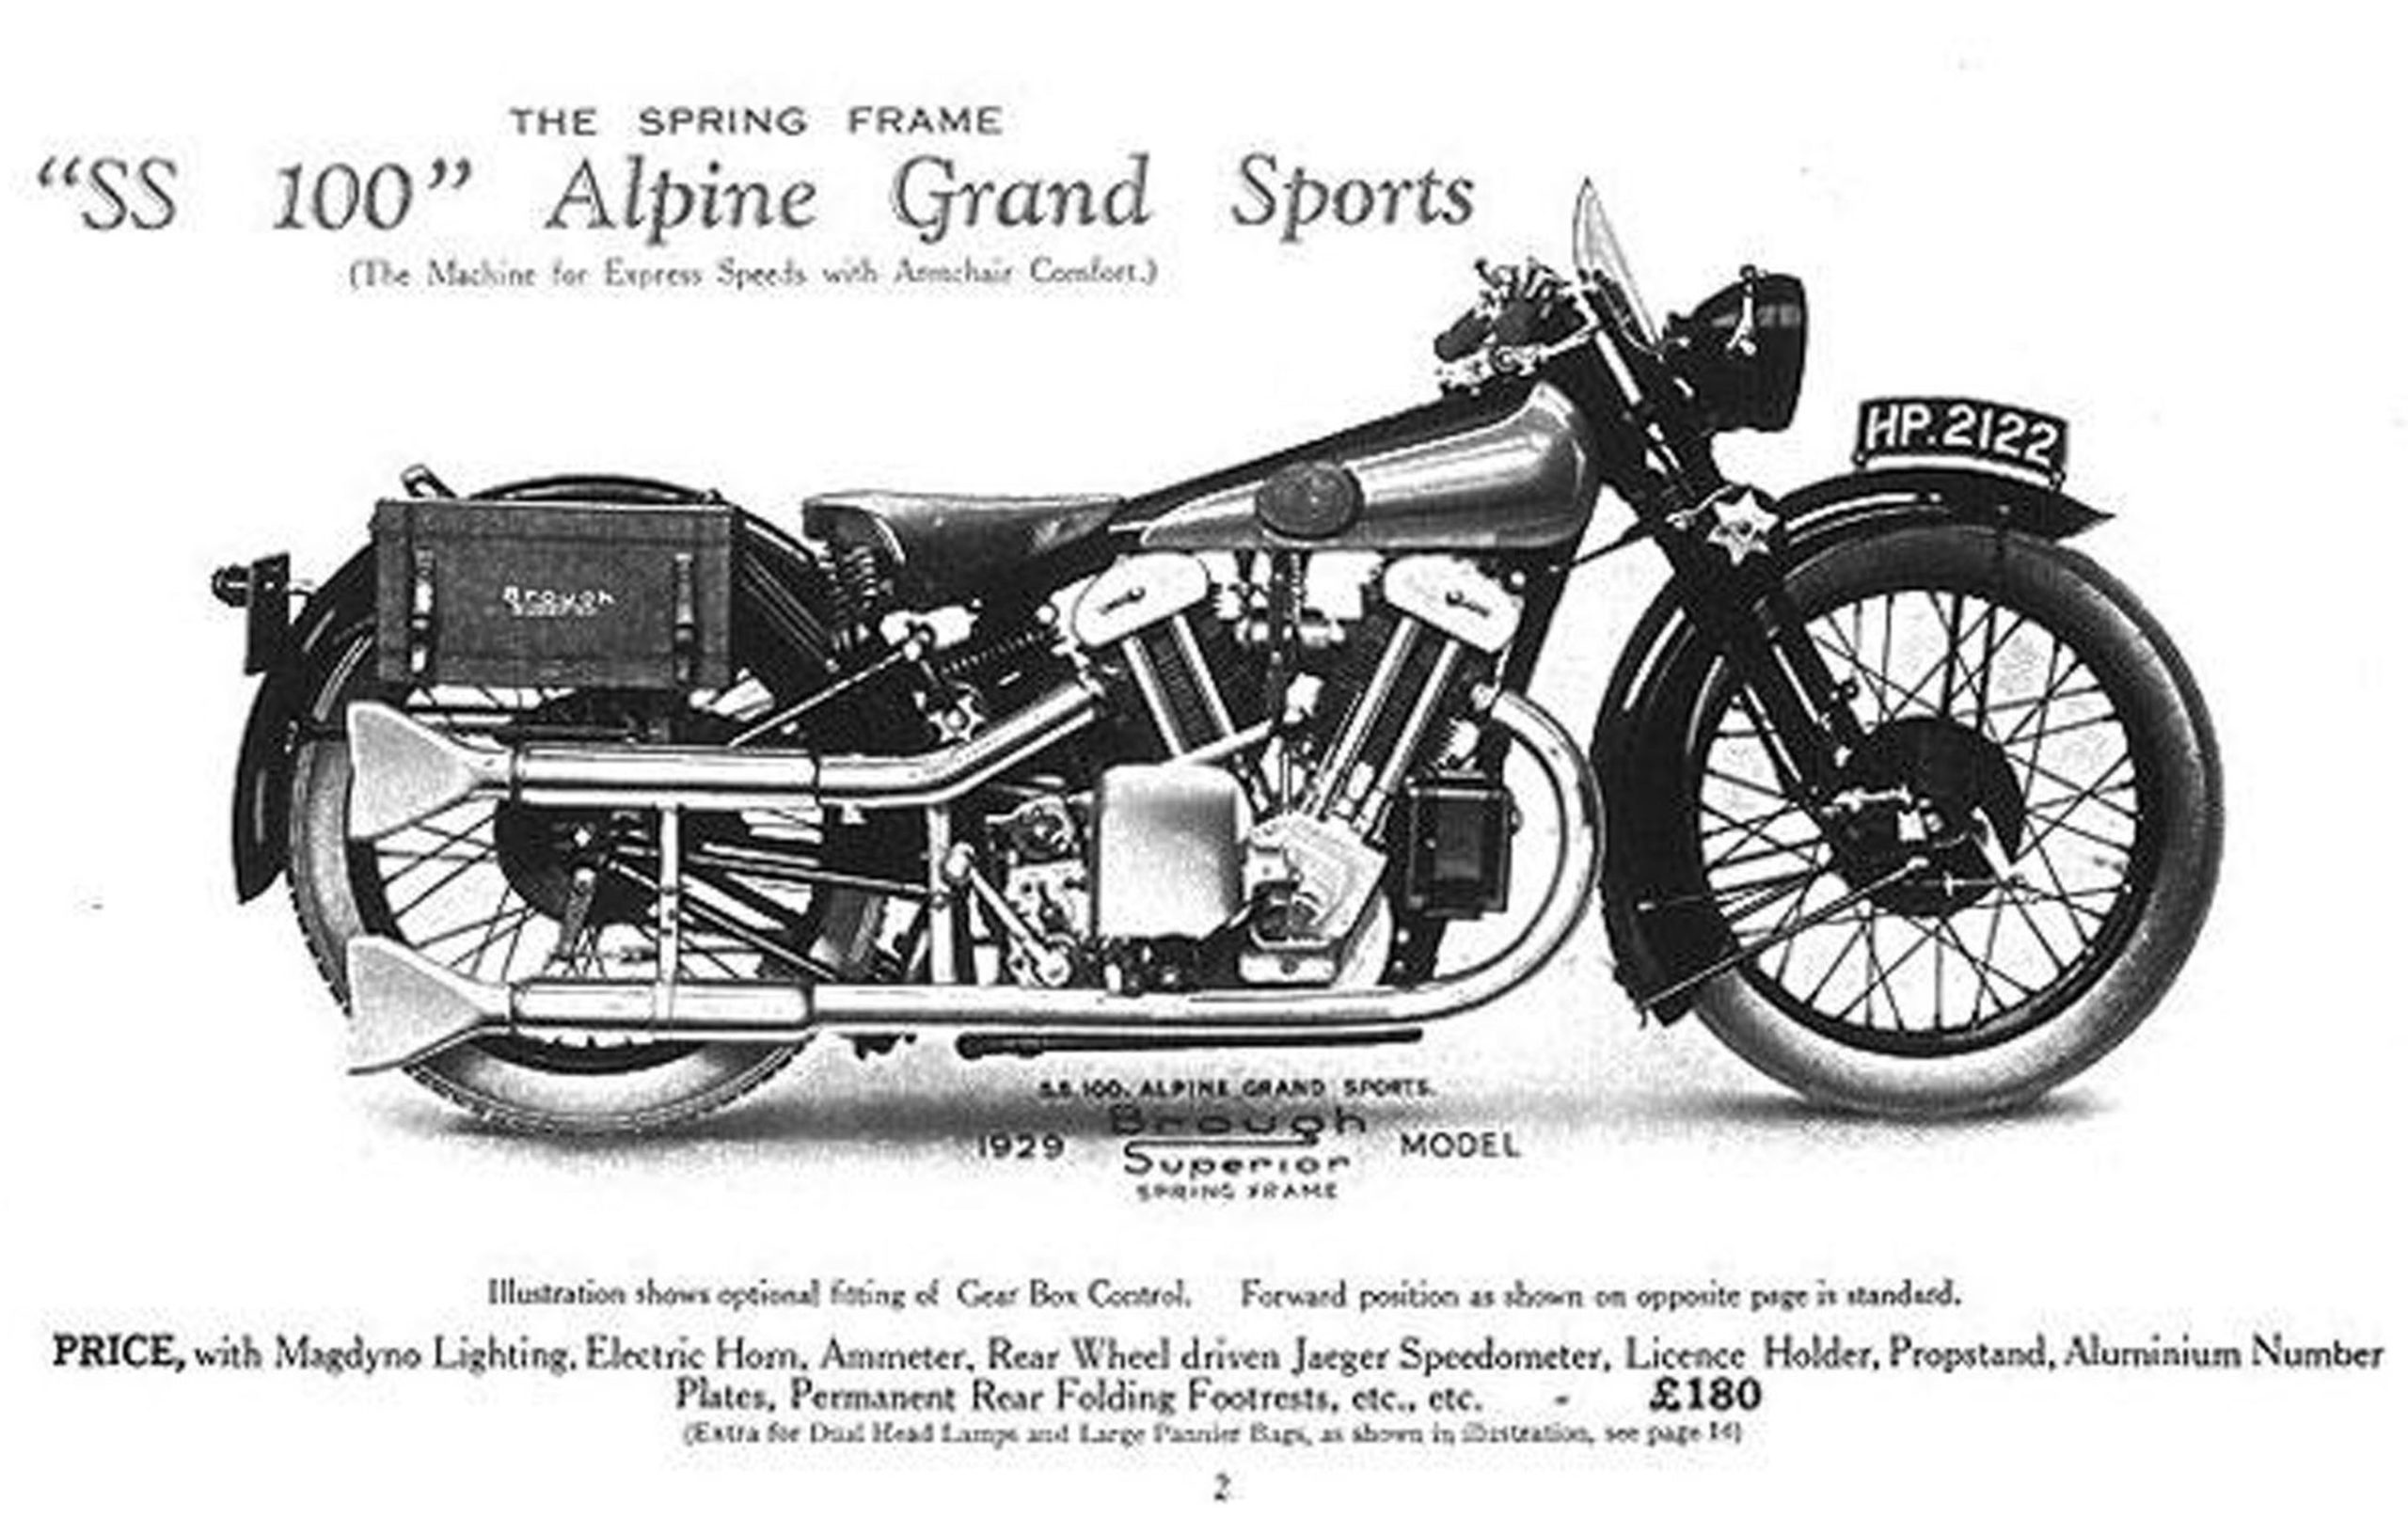 An ad from Brough Motorcycles in the 1920s